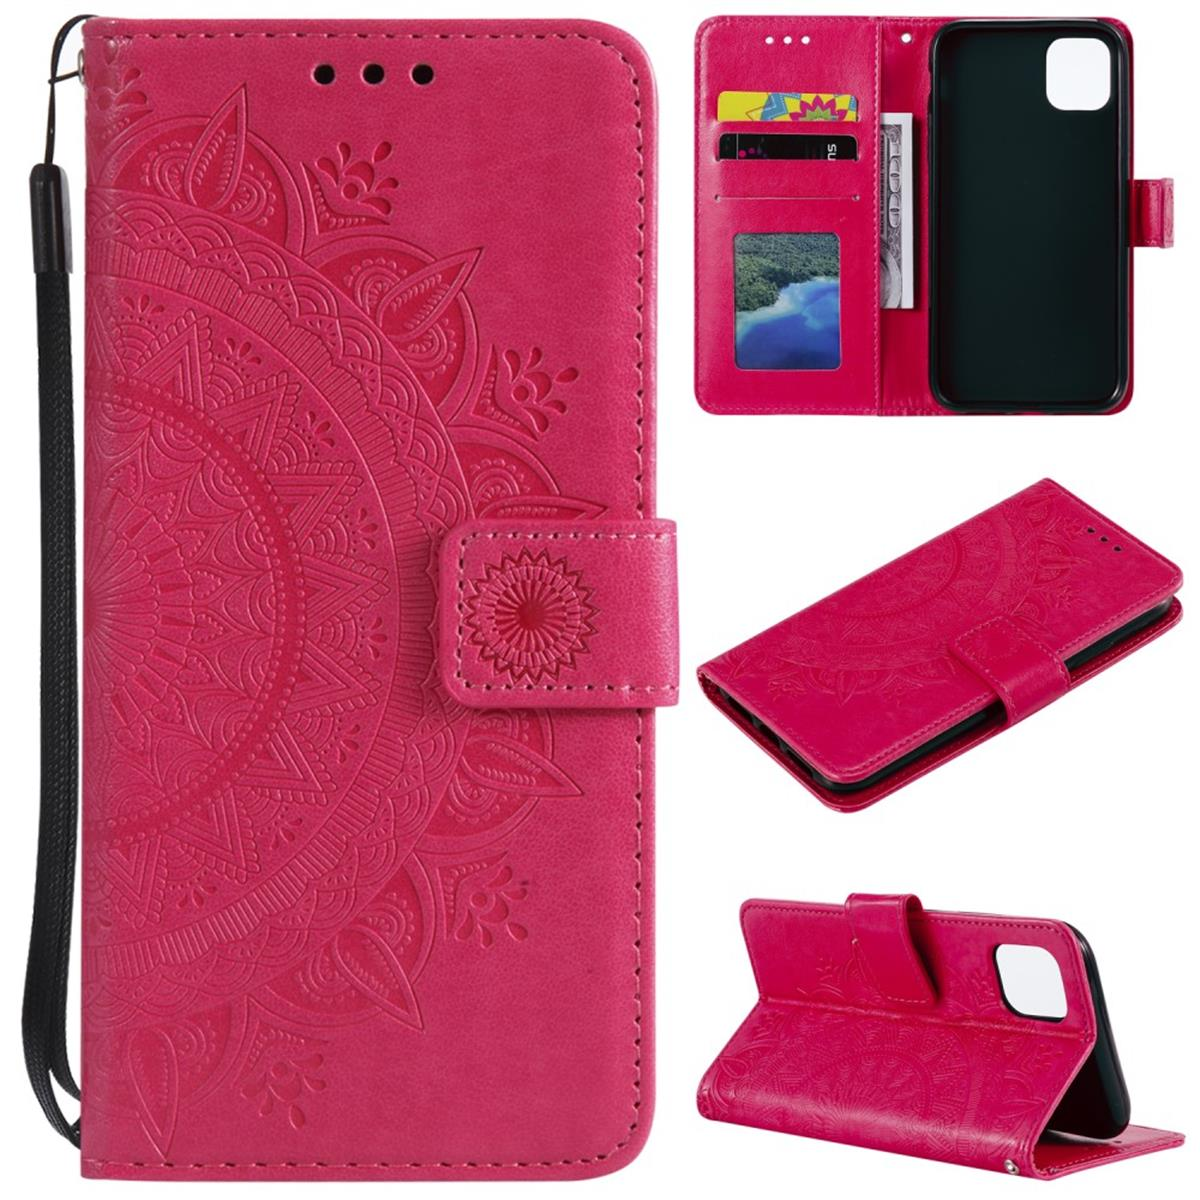 mit Bookcover, iPhone Pink COVERKINGZ 13, Mandala Klapphülle Muster, Apple,